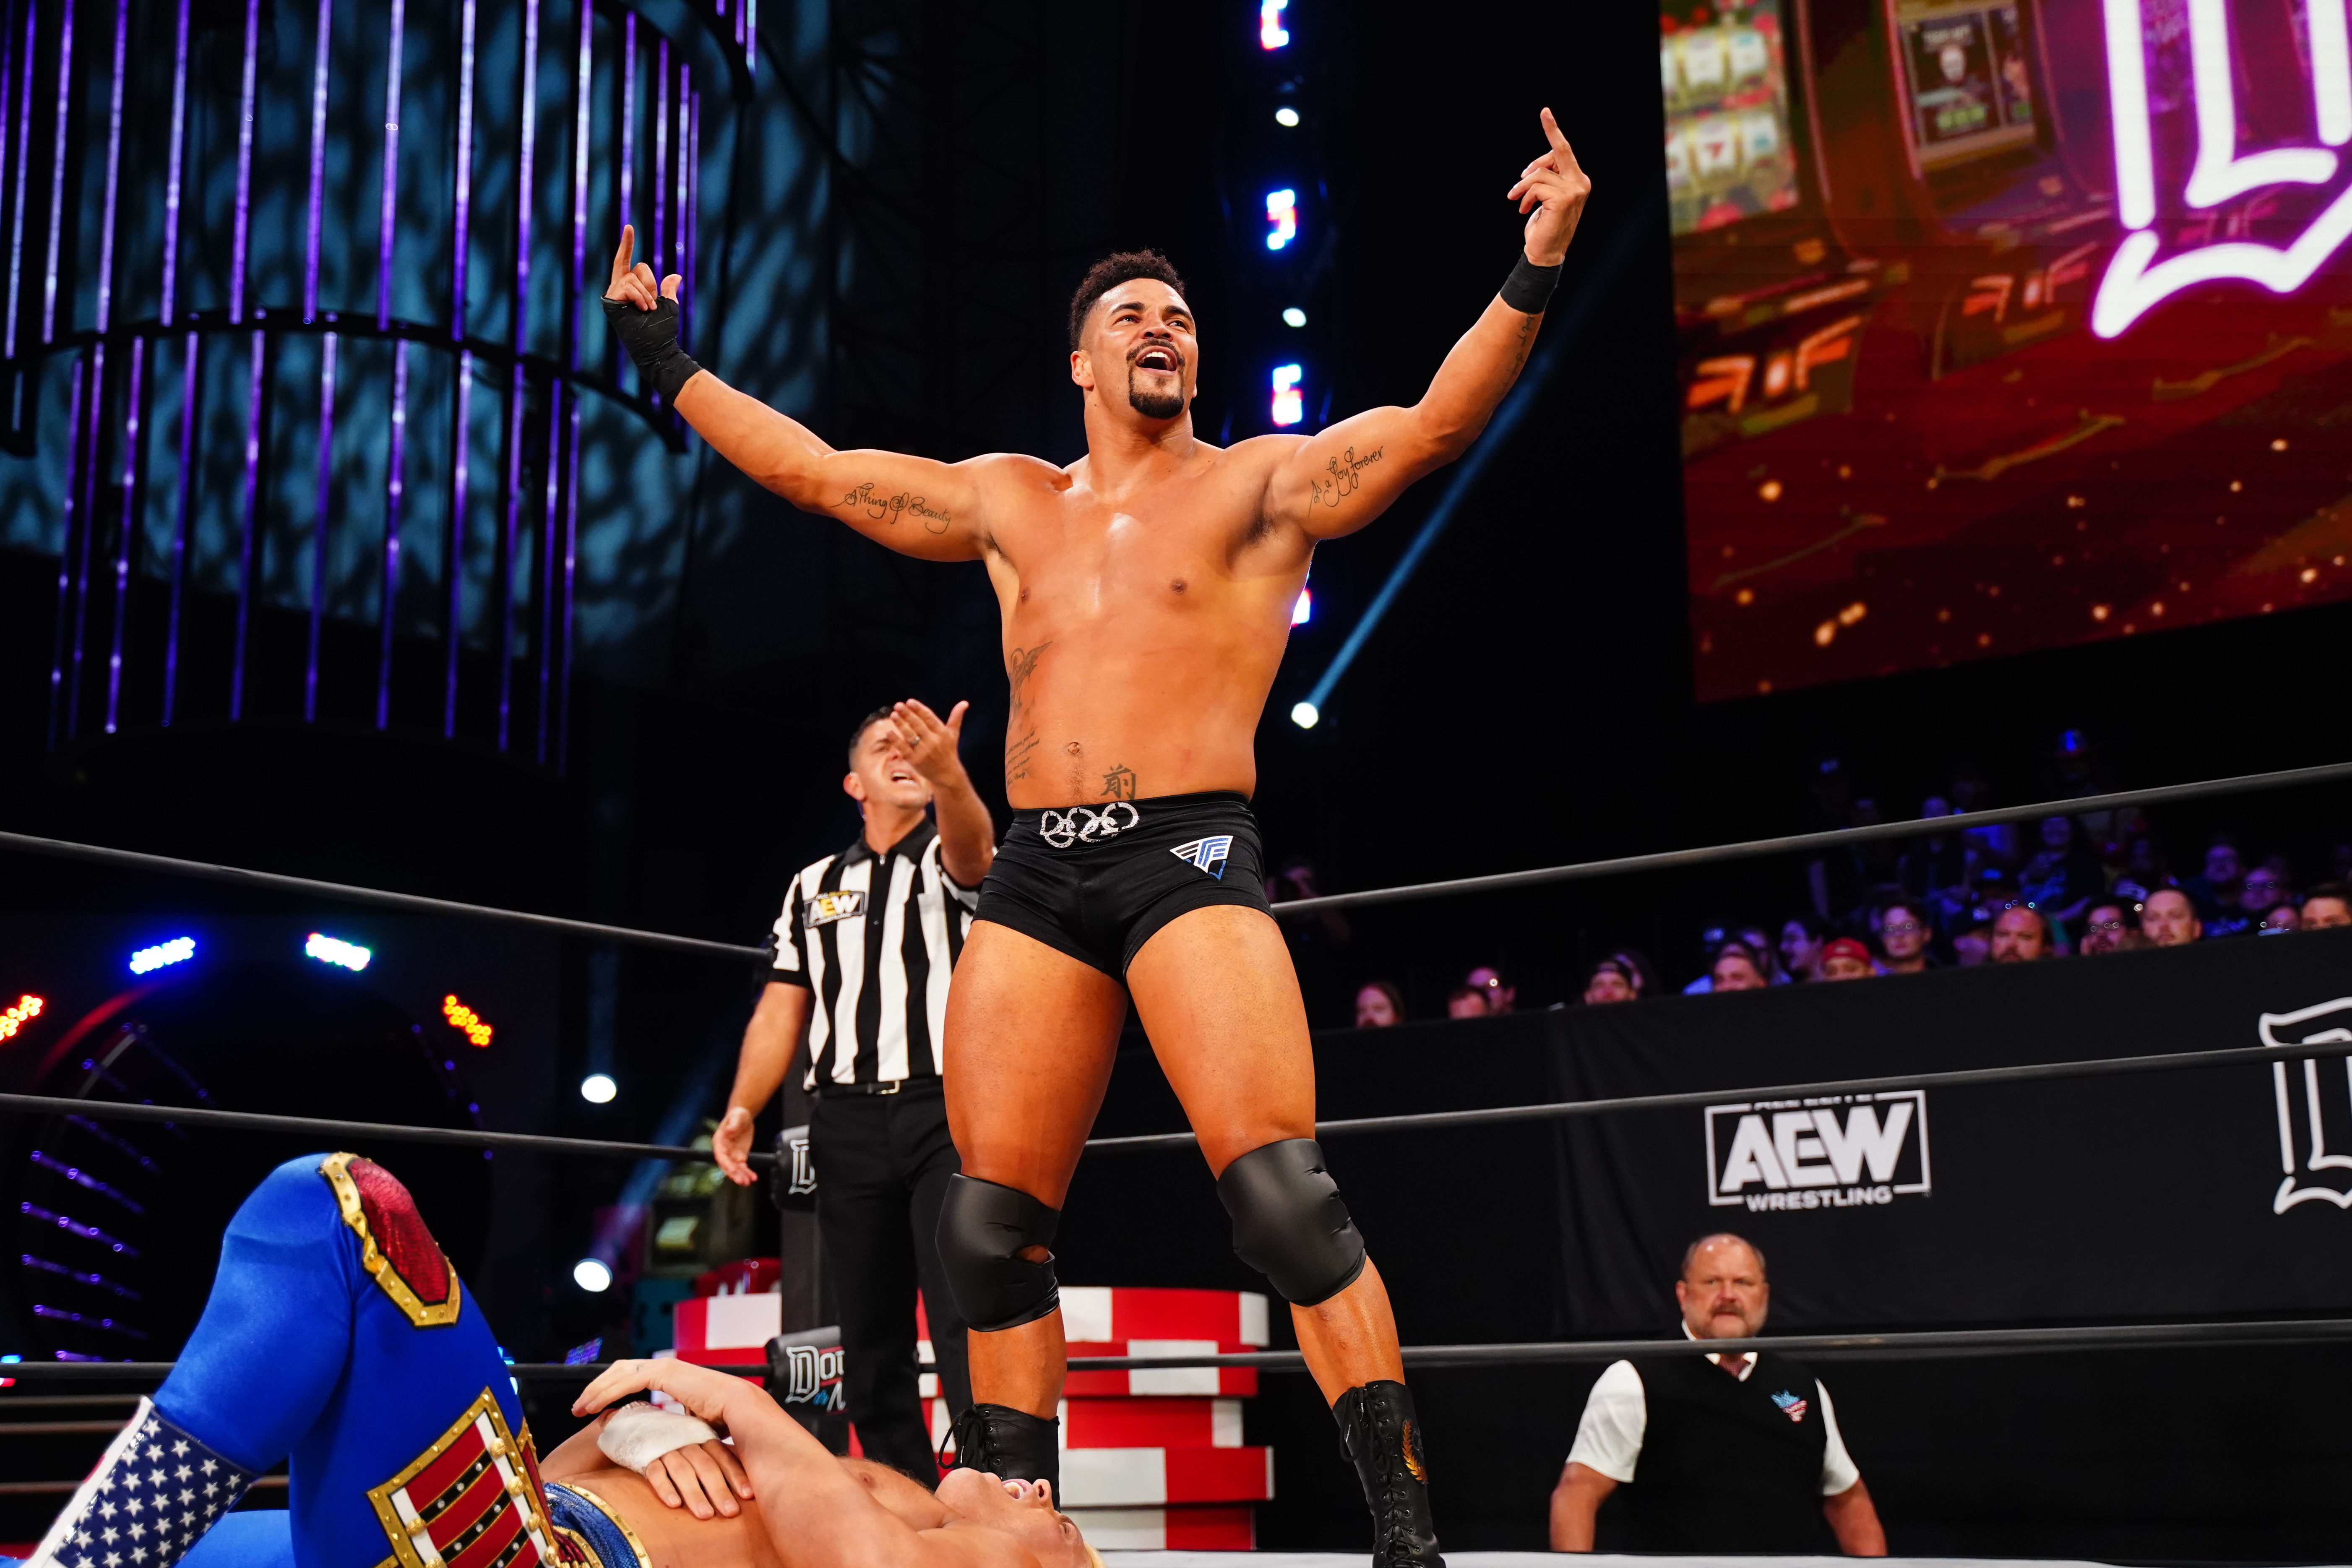 Anthony Ogogo has made the transition from boxing to professional wrestling (AEW Media)